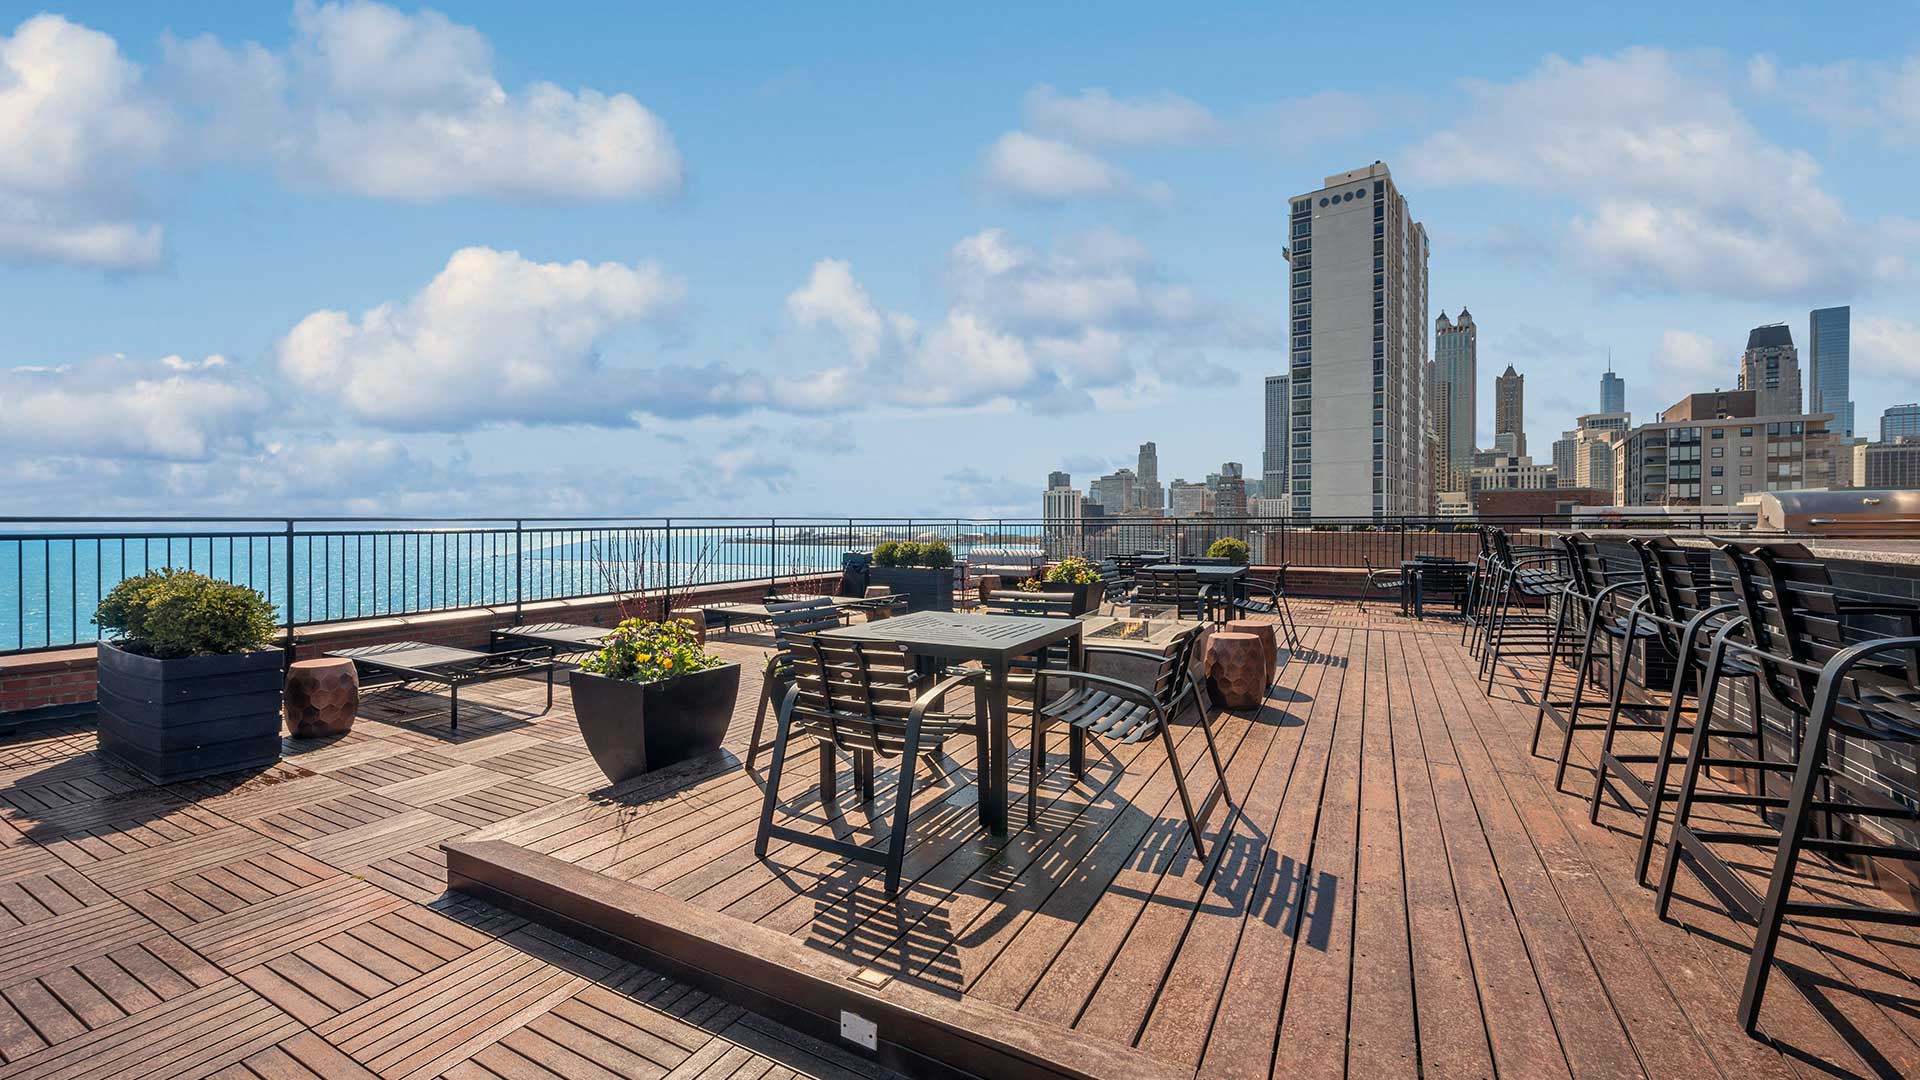 Looking across the rooftop deck with Lake Michigan and the Chicago skyline in the background. Various deck furniture is set throughout the deck.